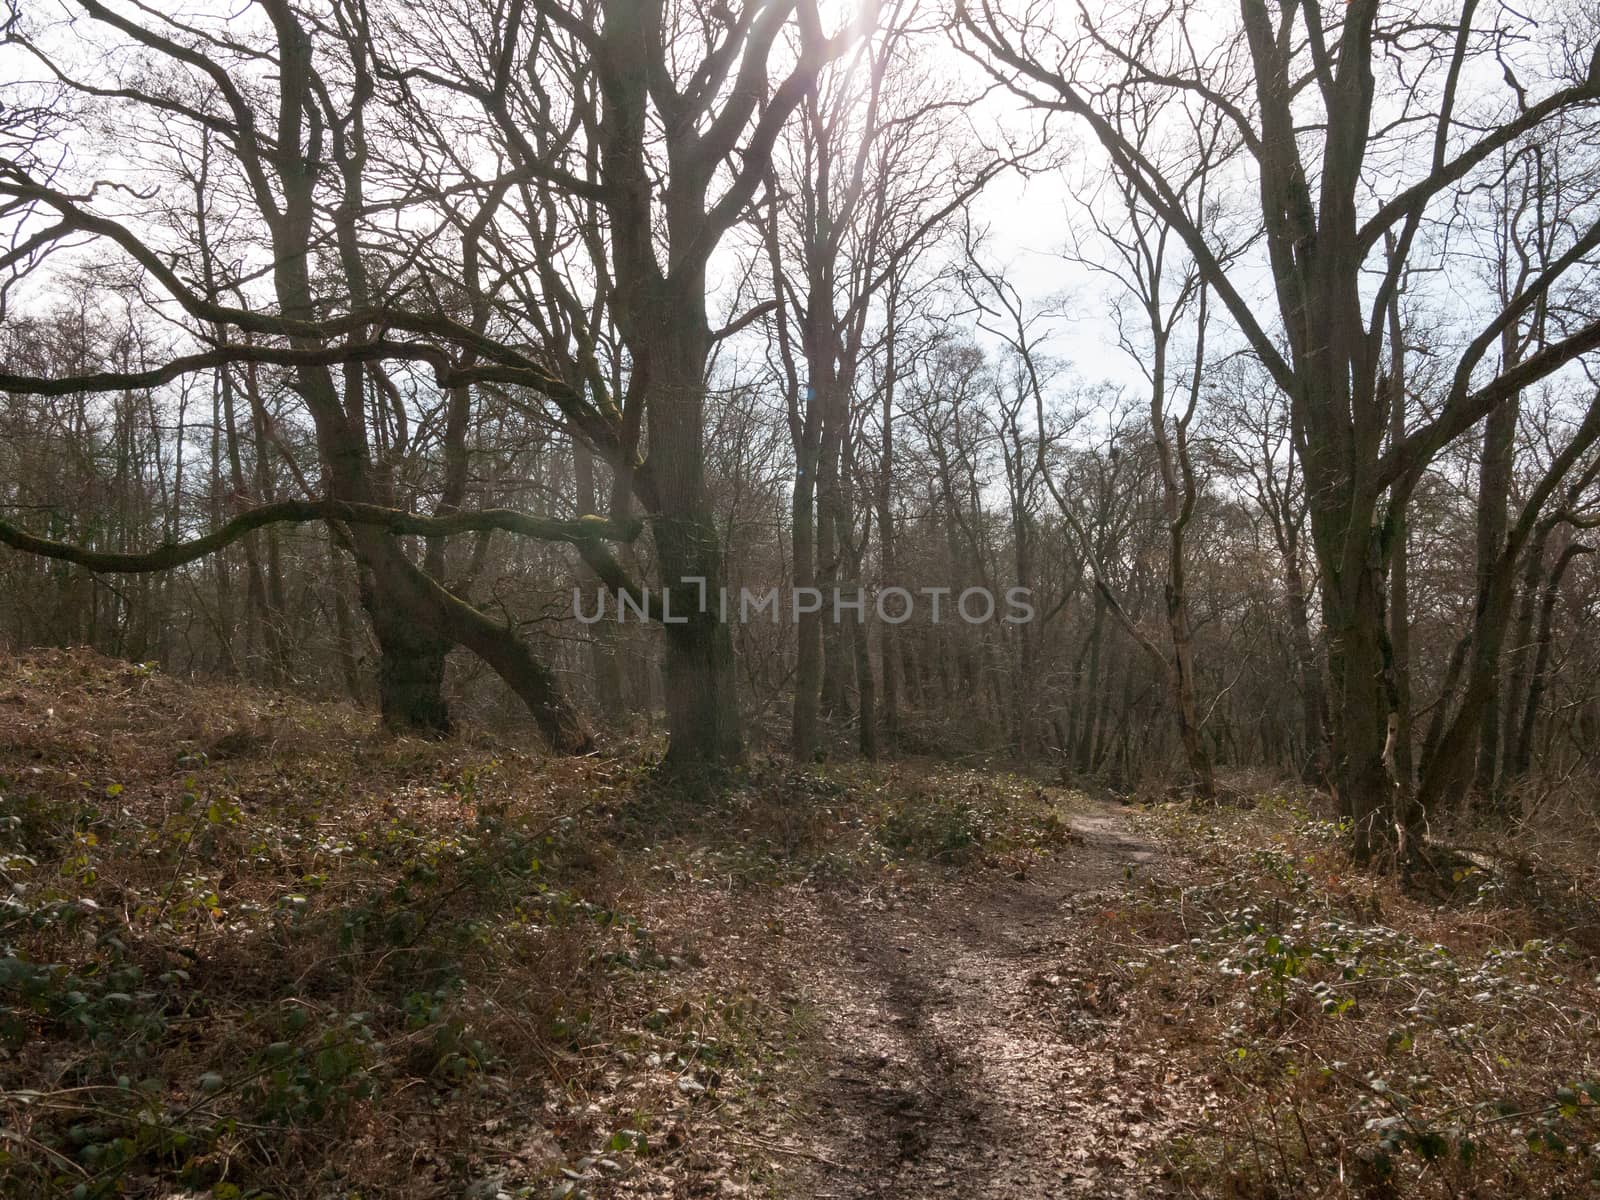 uk woodland tree bare branches autumn spring forest landscape na by callumrc